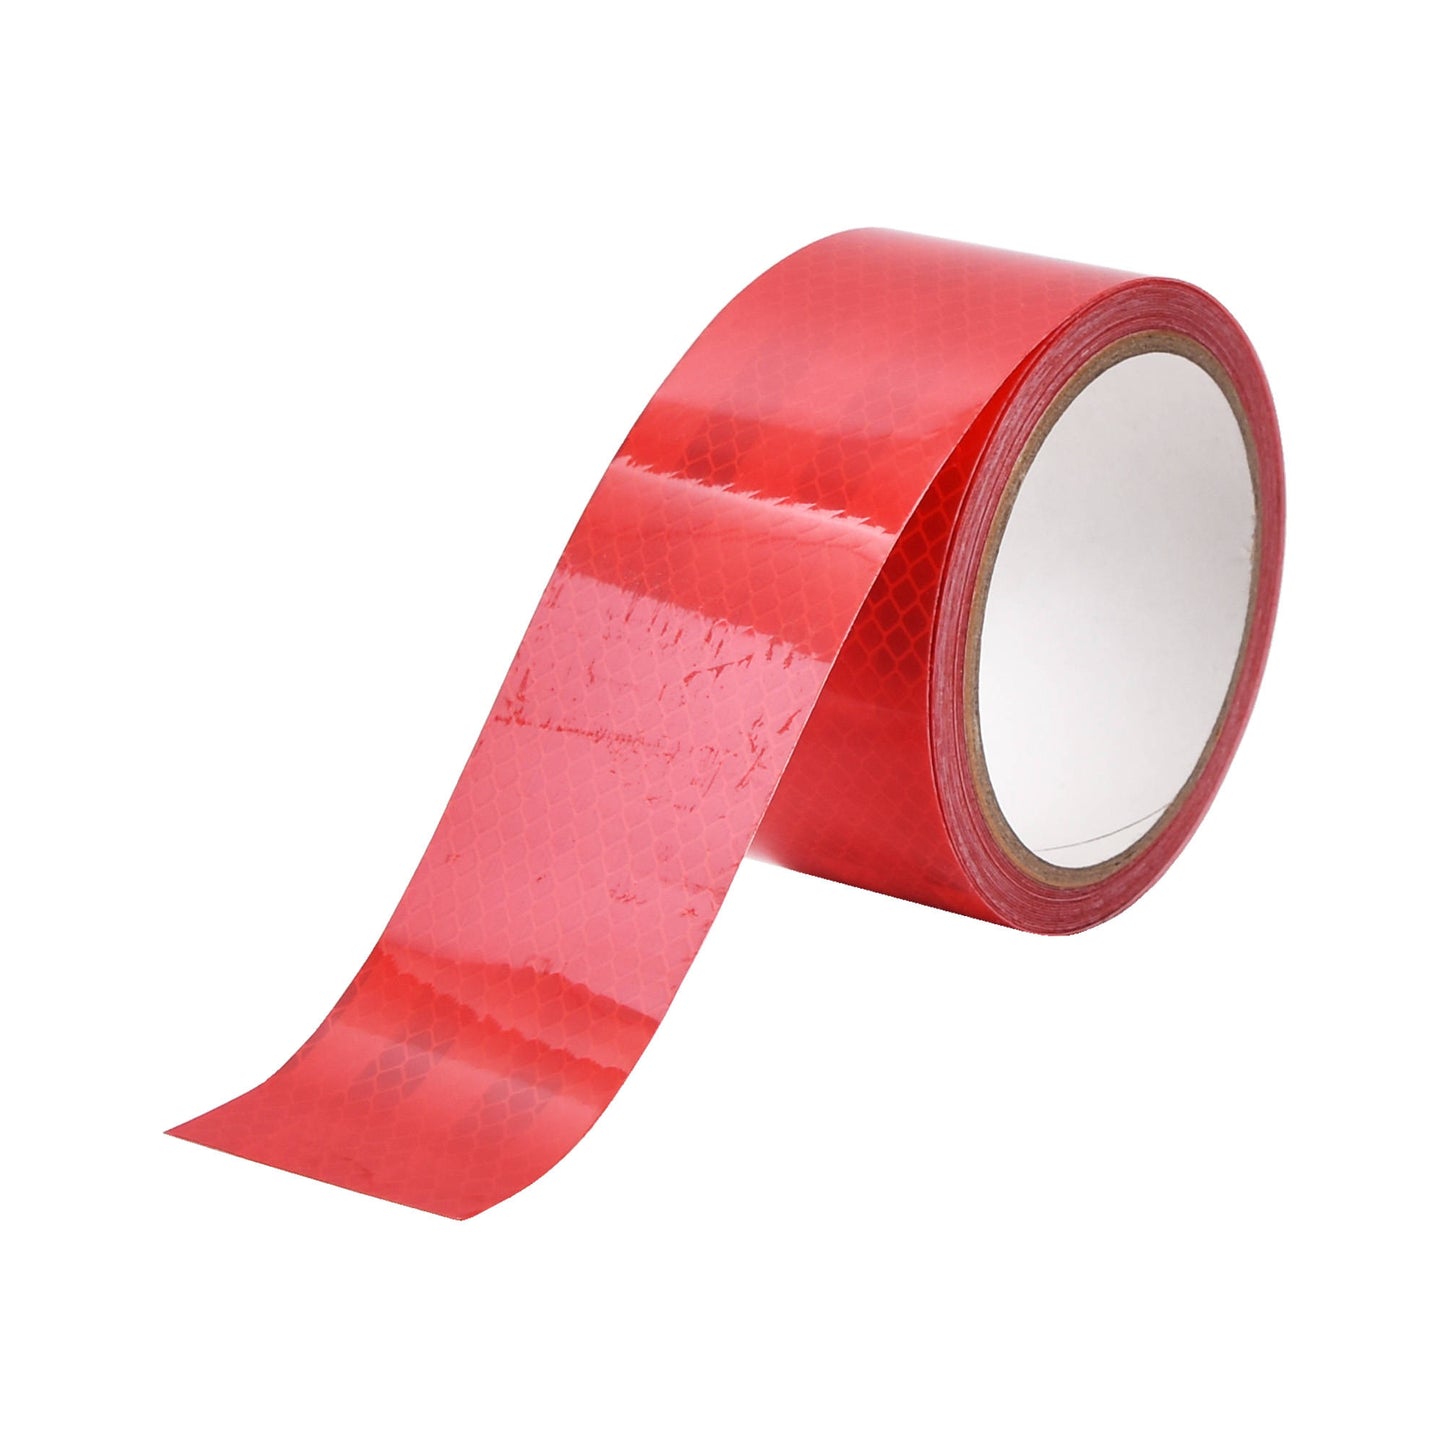 Reflective tape 50 mm x 5 m E-approved